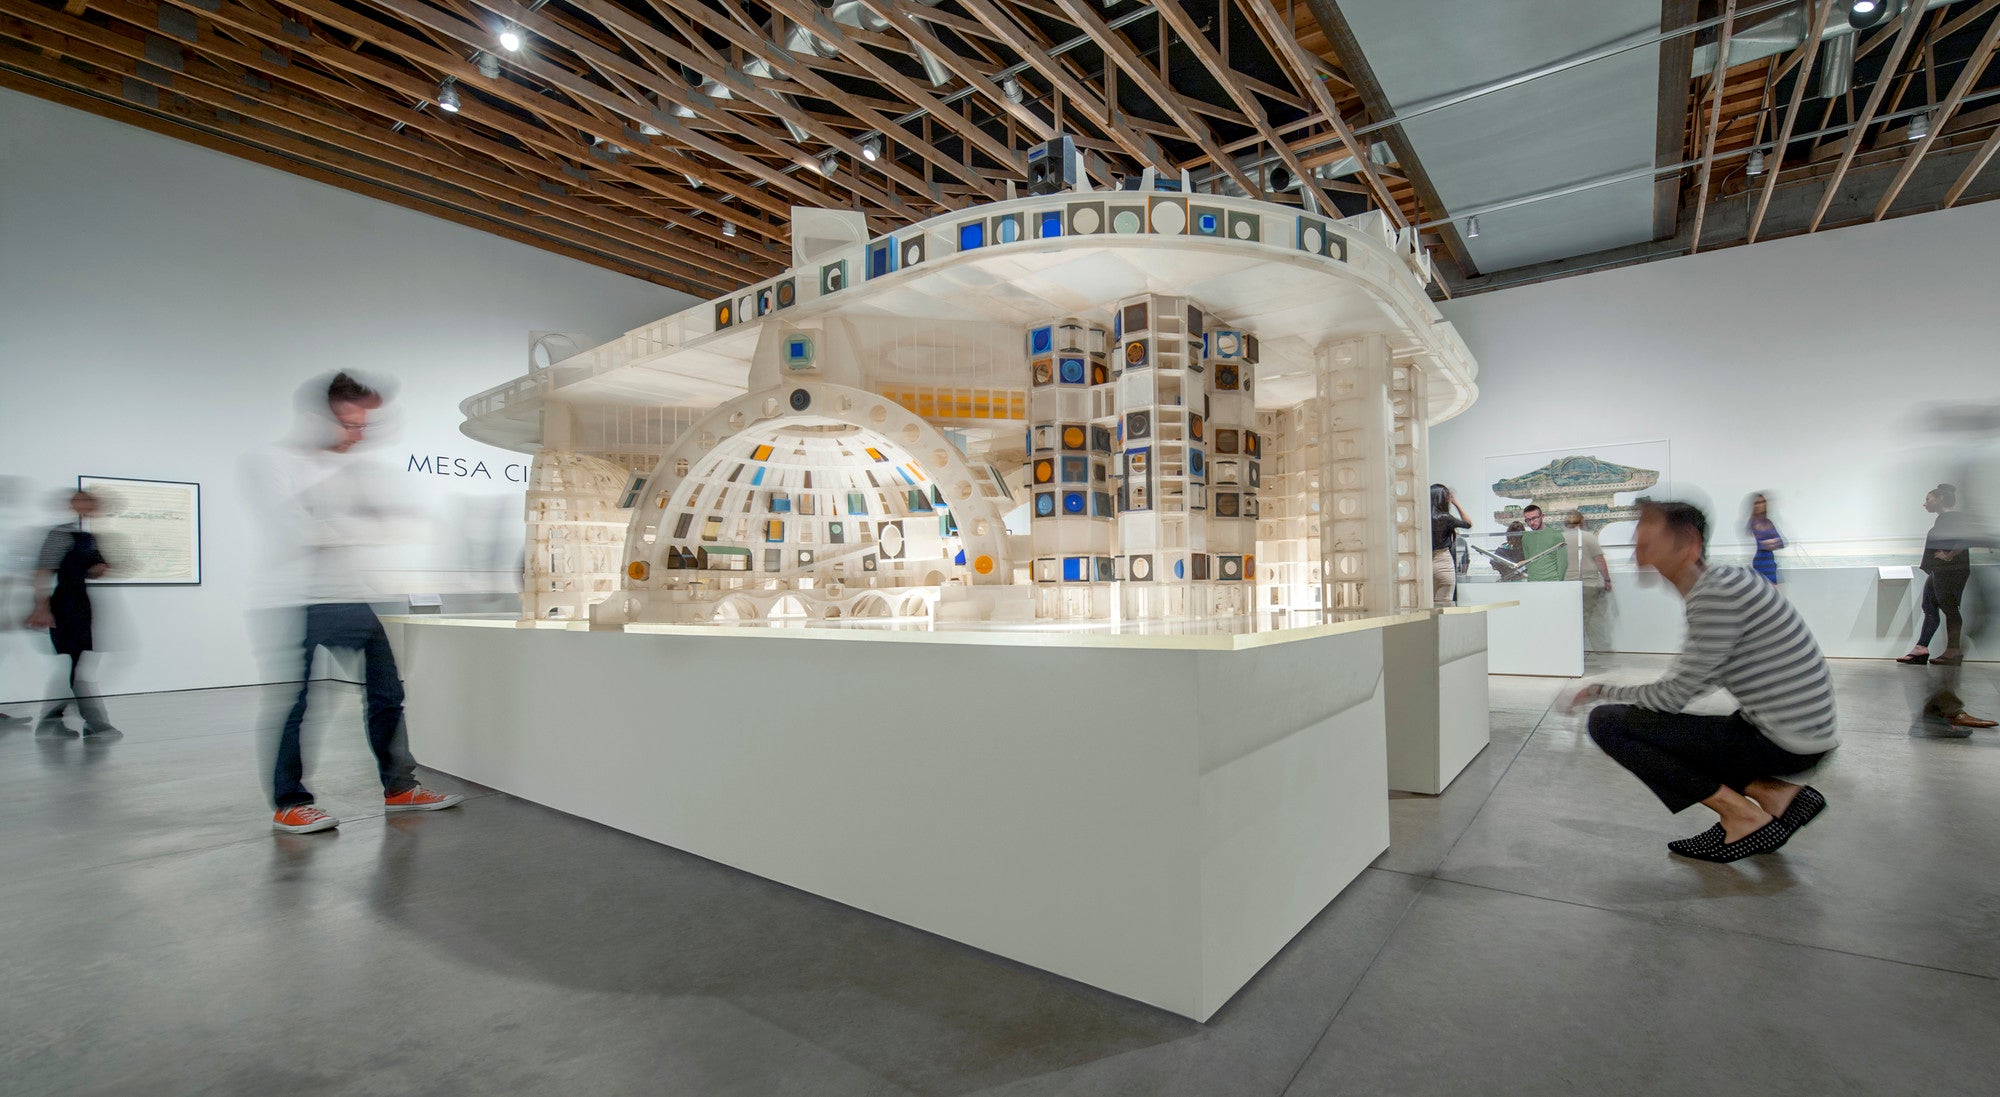 Installation view, Paolo Soleri: Mesa City to Arcosanti, on view at the Scottsdale Museum of Contemporary Art, 2013. Photo: Bill Timmerman